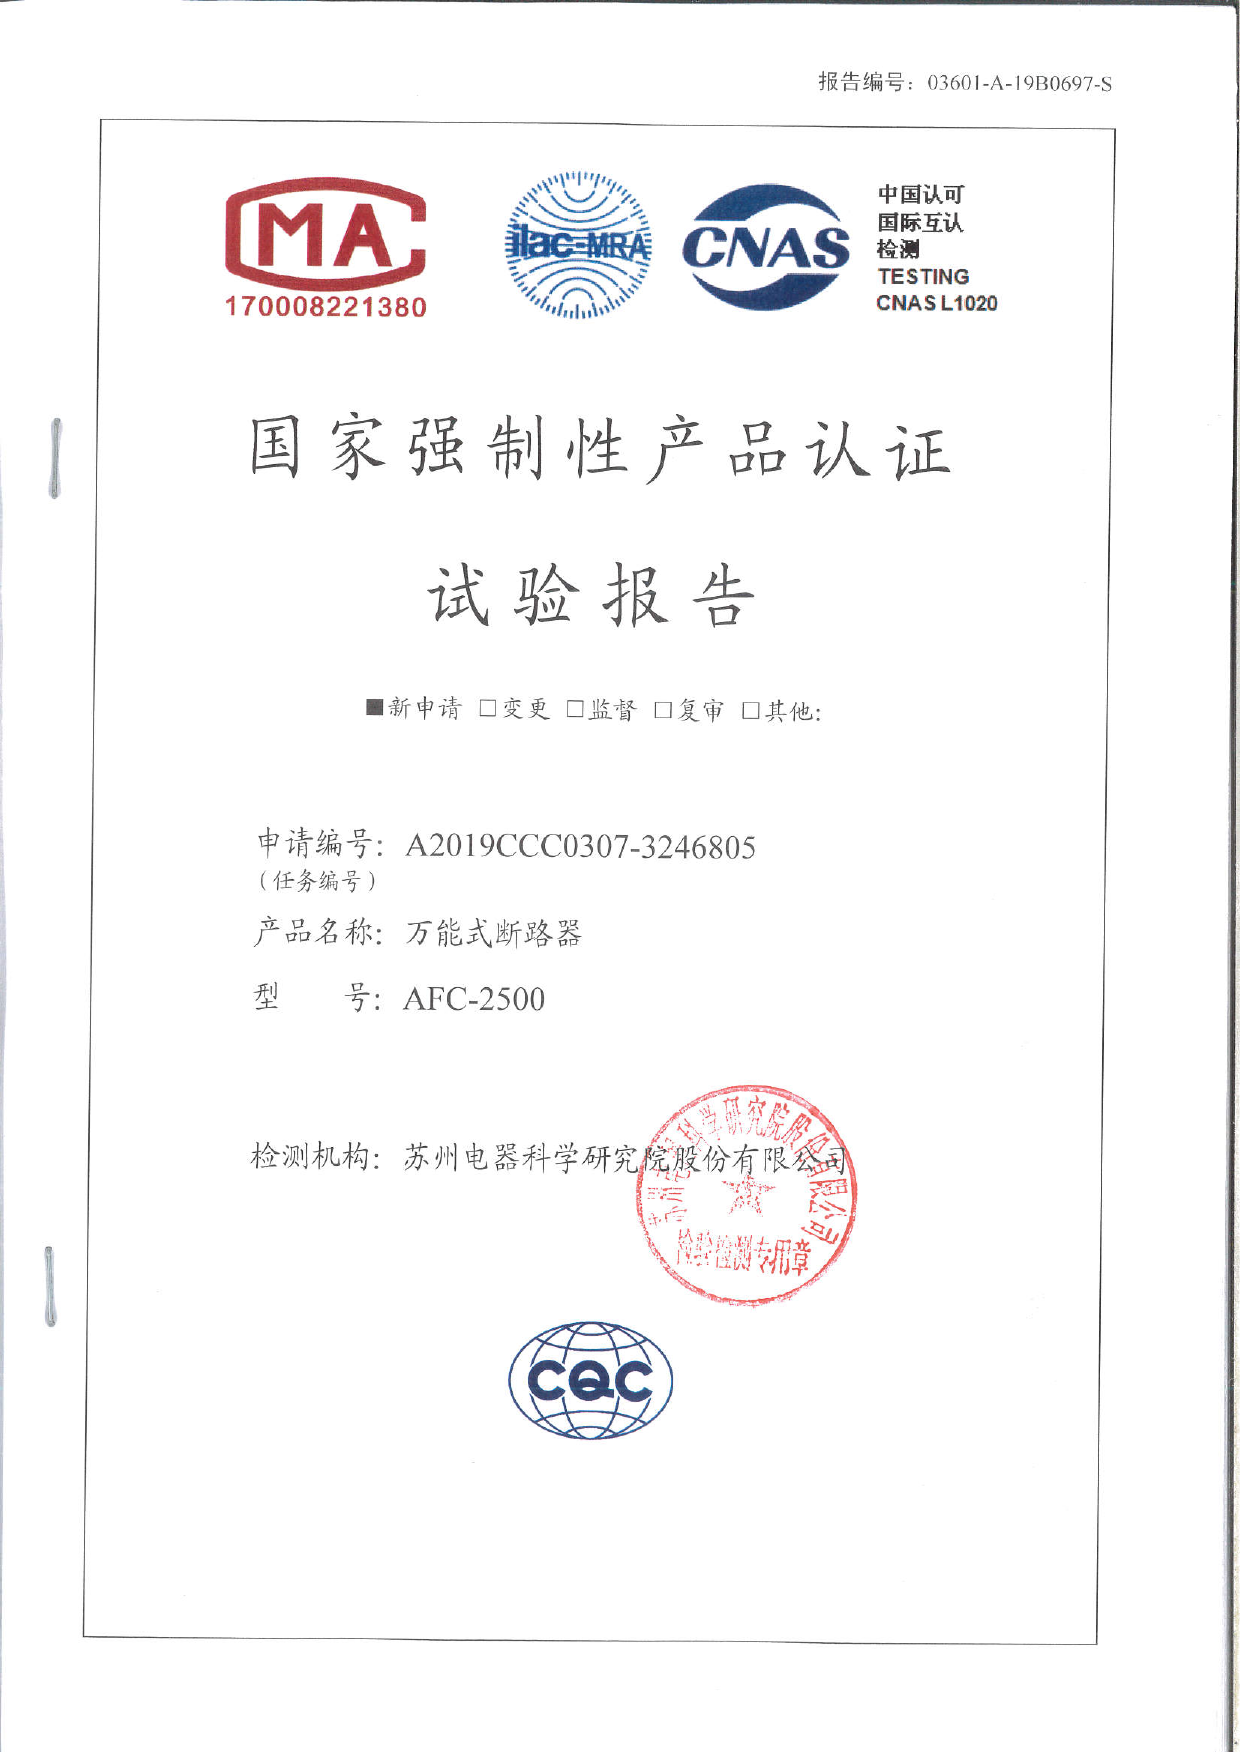 AFC2500 type test report